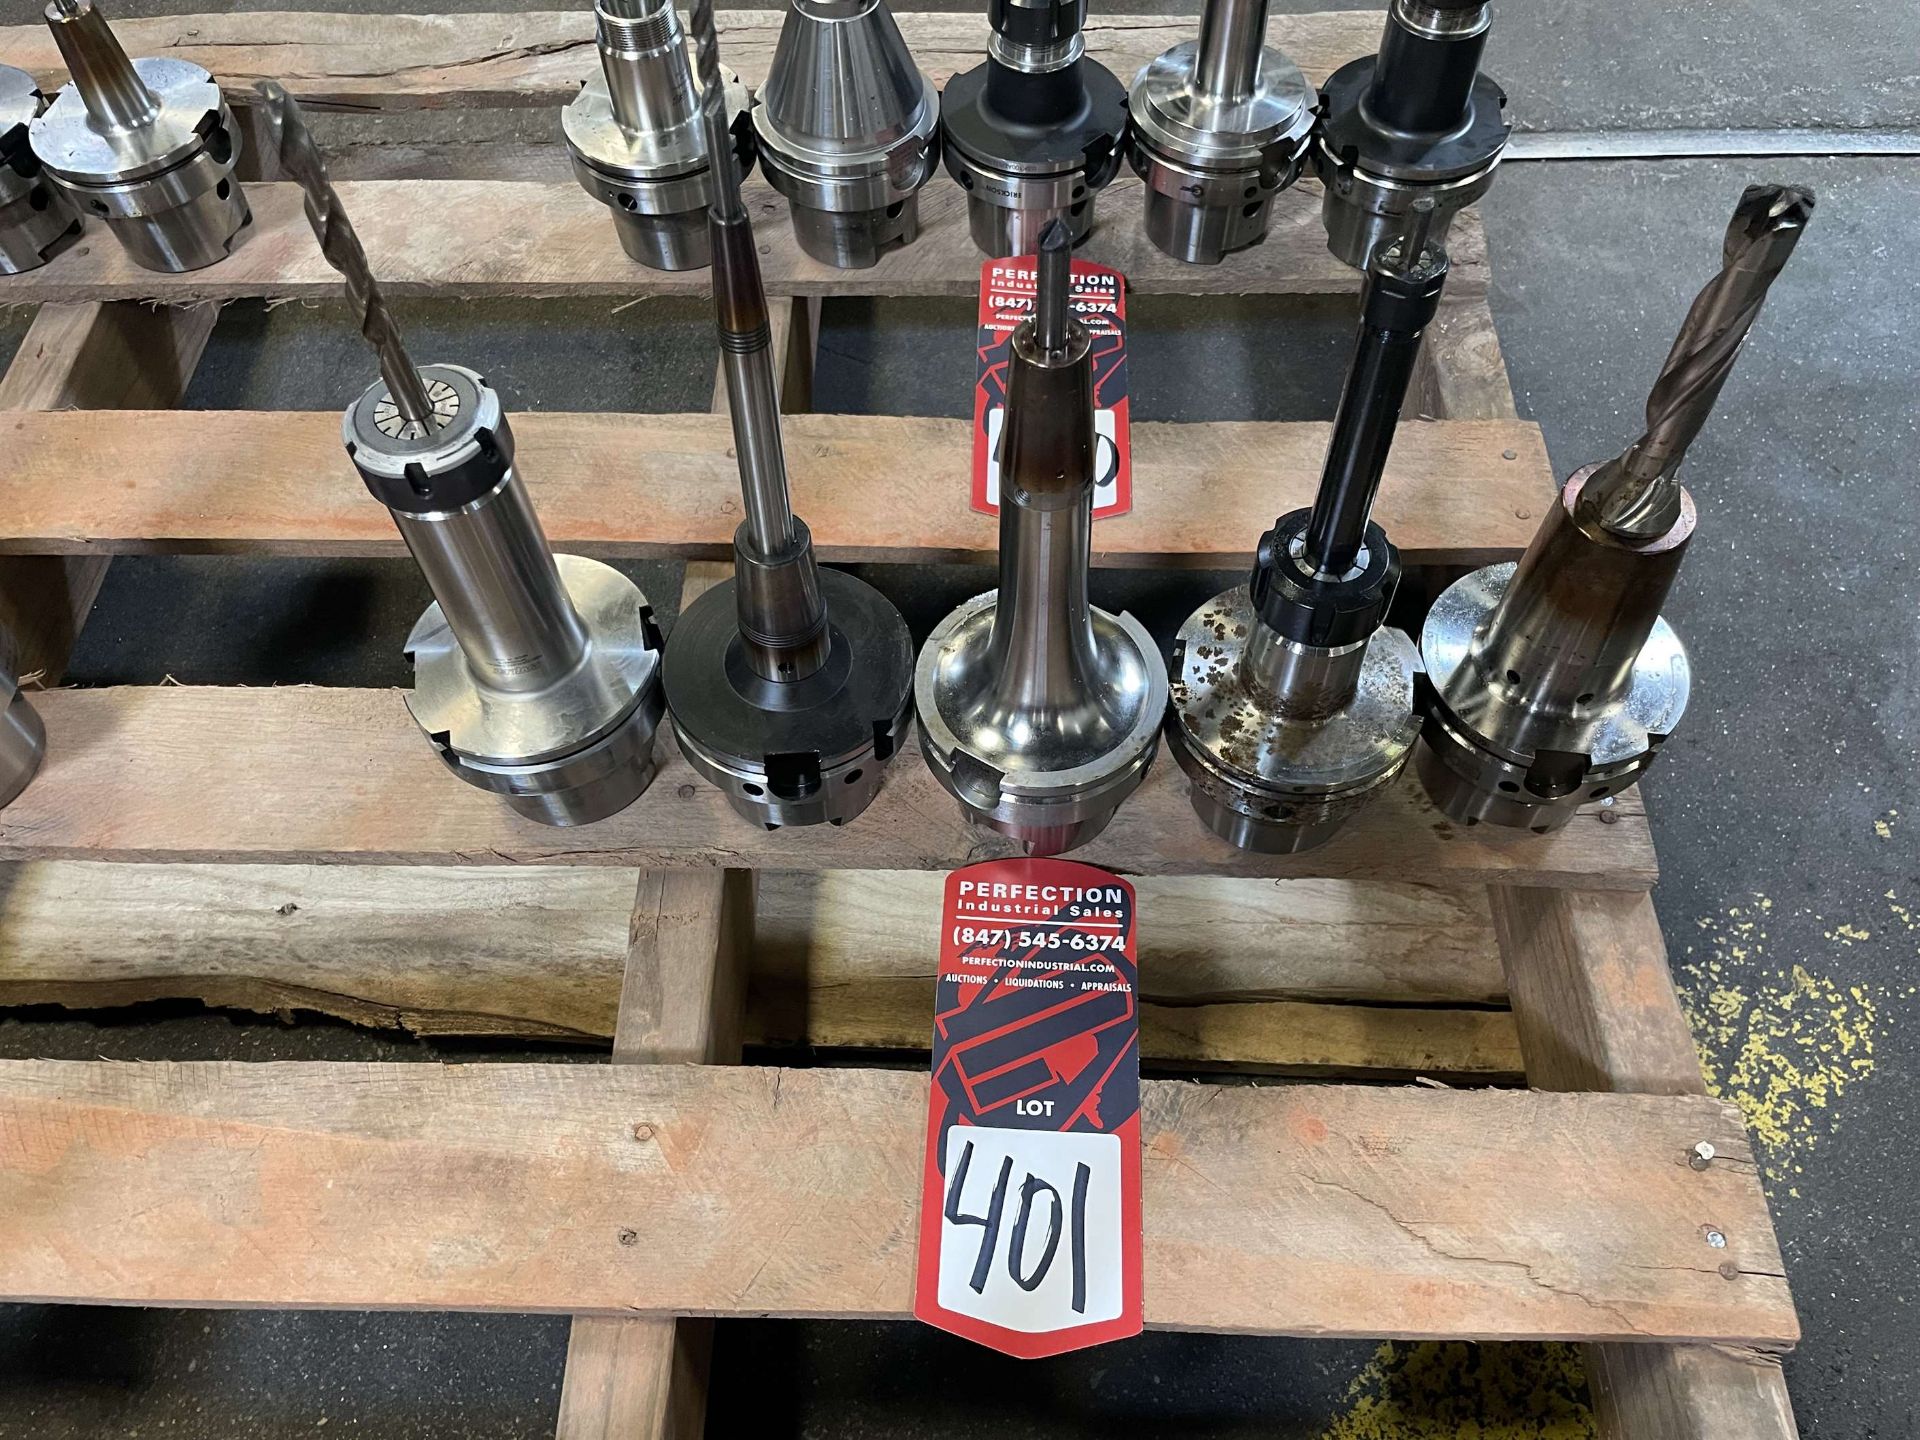 Lot of (5) HSK 100 Tool Holders (Located at 4200 West Harry St., Wichita, KS 67209)